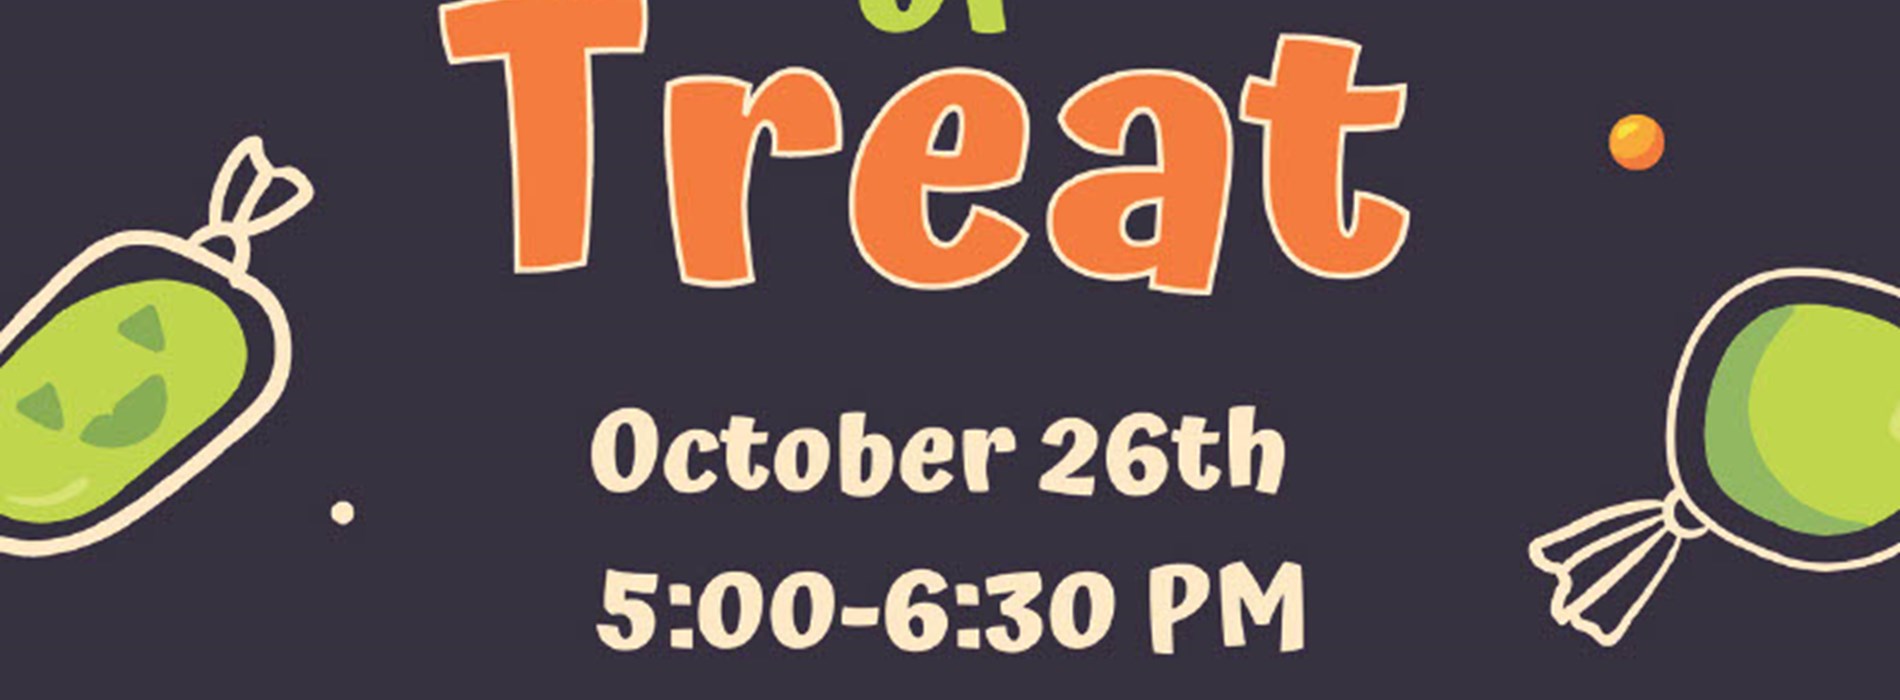 trunk-or-treat-event-flyer1024_1.jpg